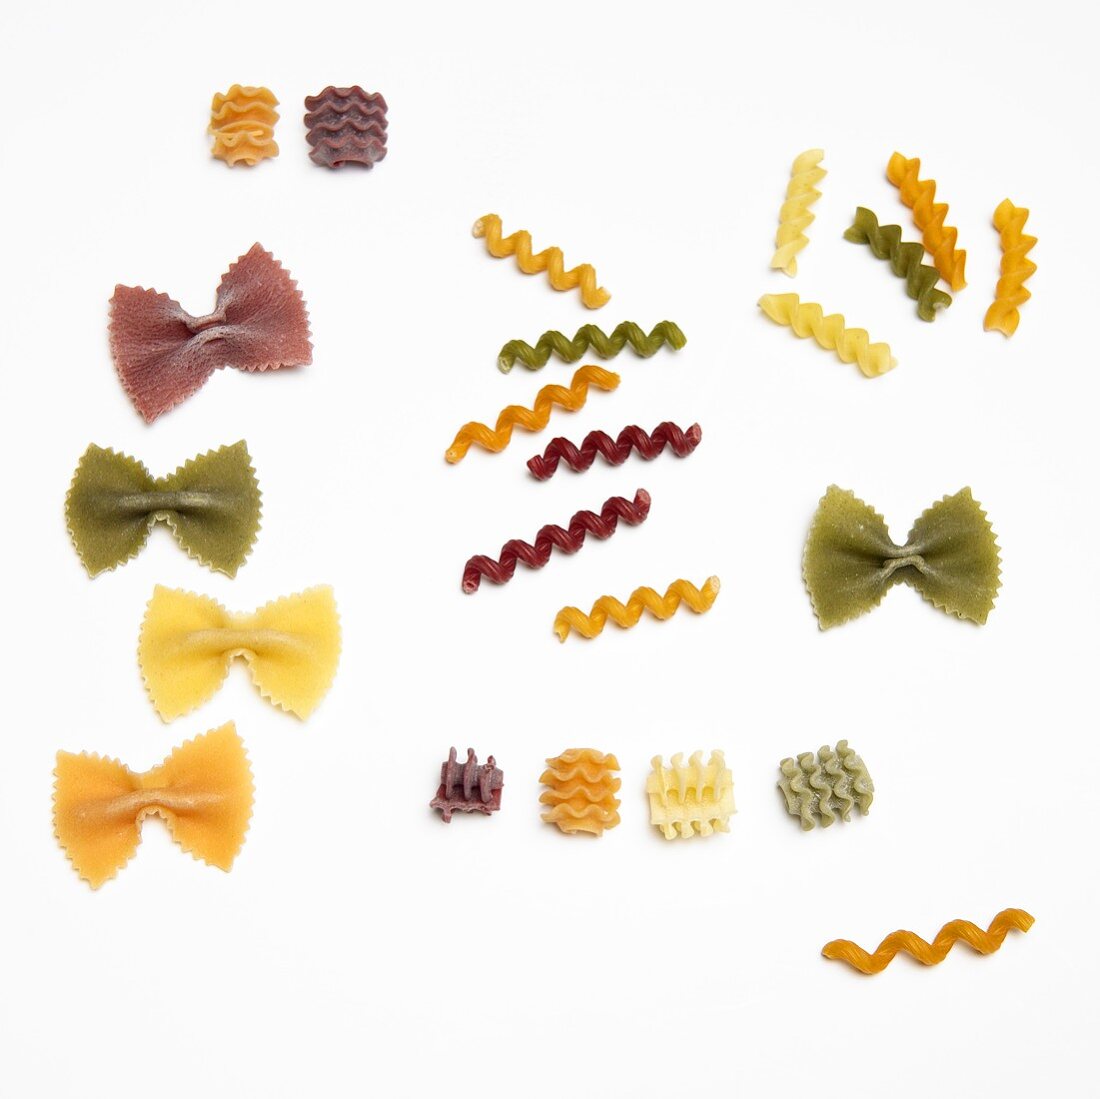 Various Types of Dried Pasta on White Background